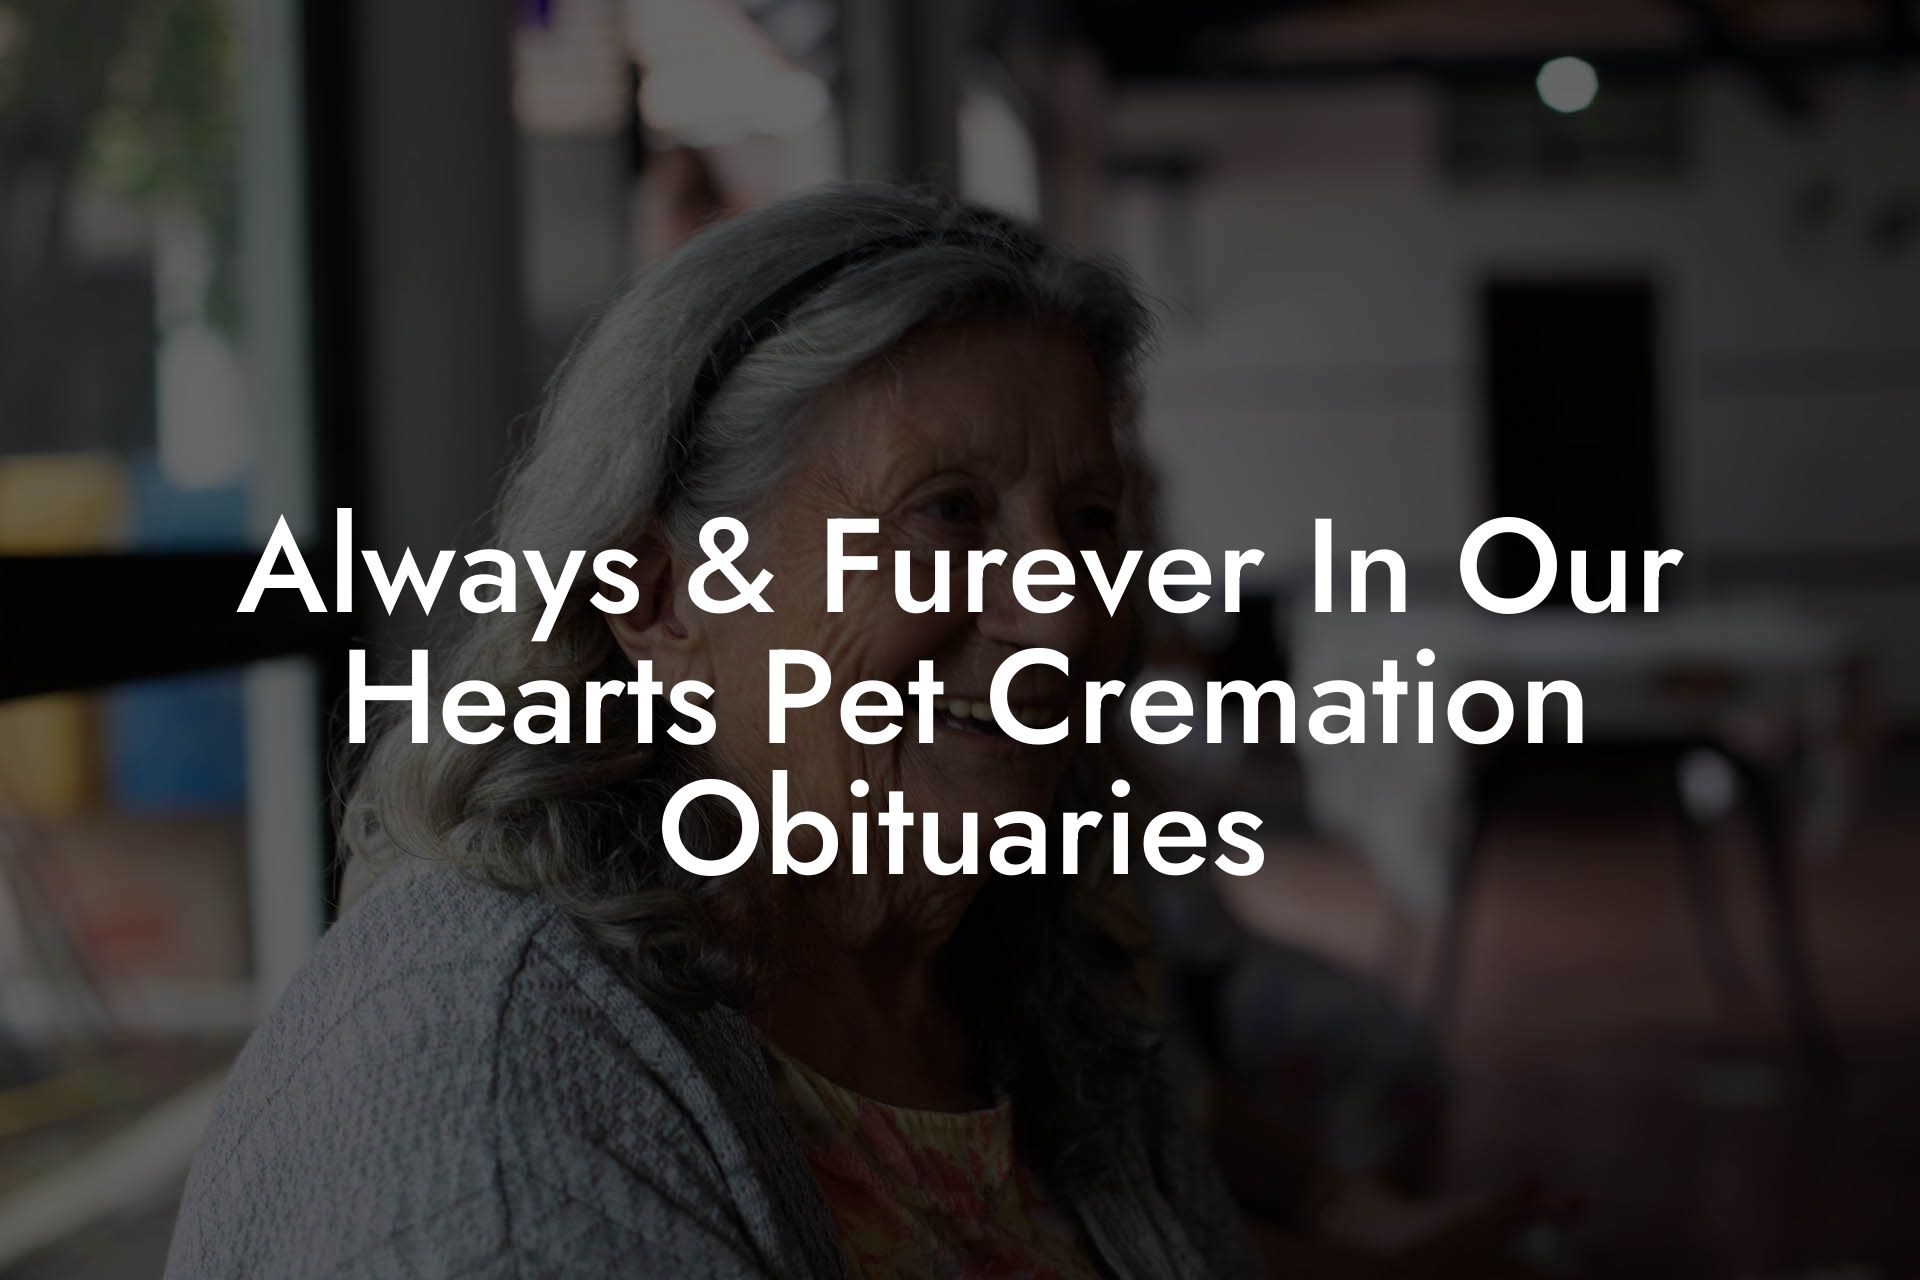 Always & Furever In Our Hearts Pet Cremation Obituaries